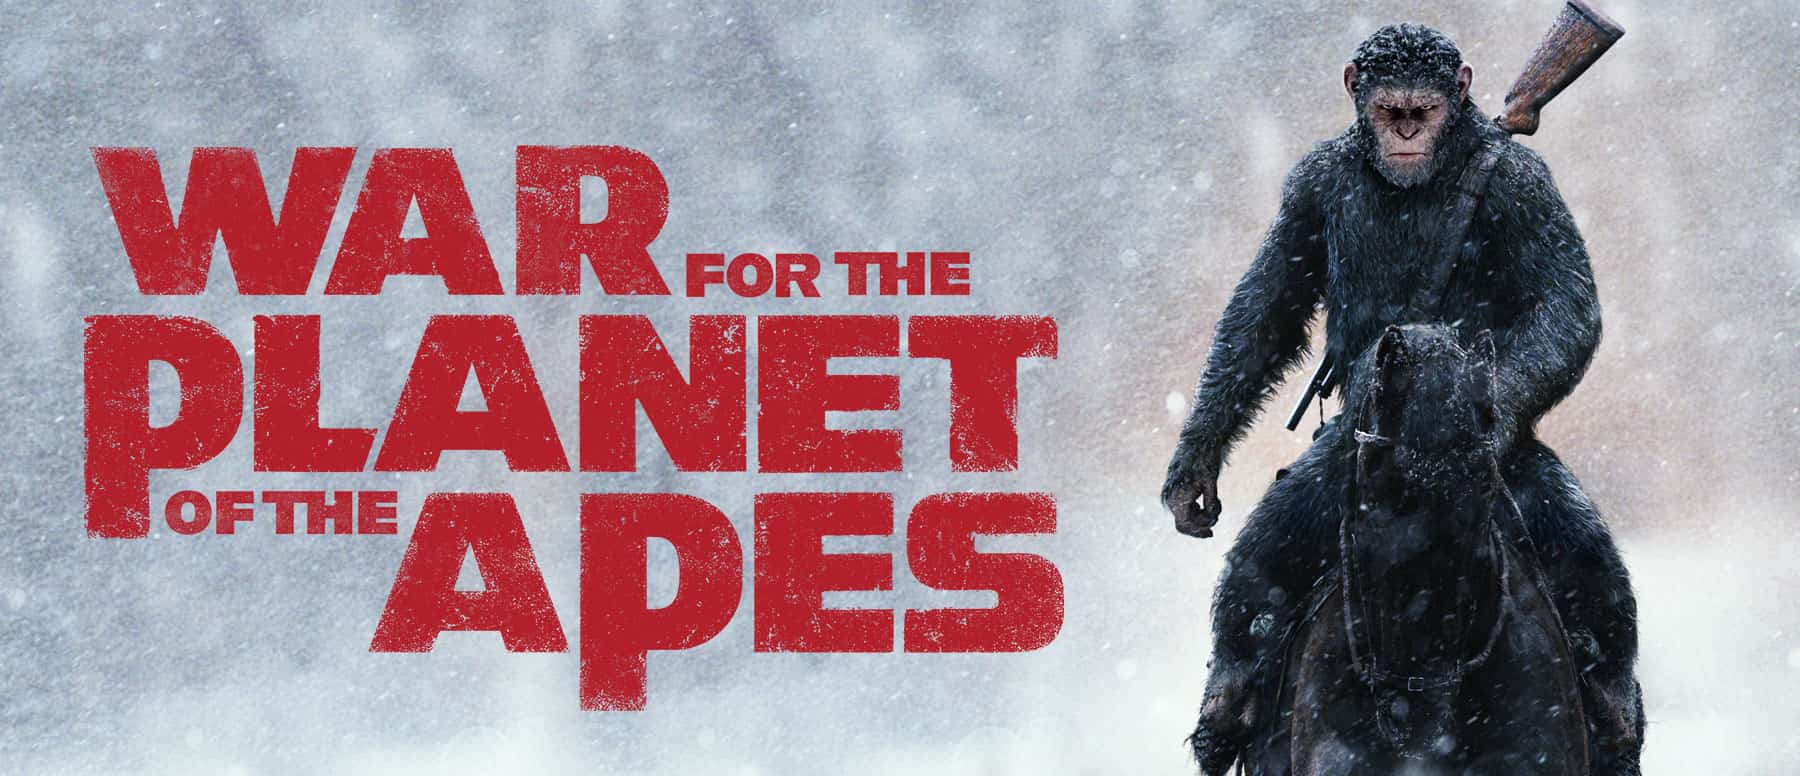 War for the Planet of the Apes 4K 2017 big poster